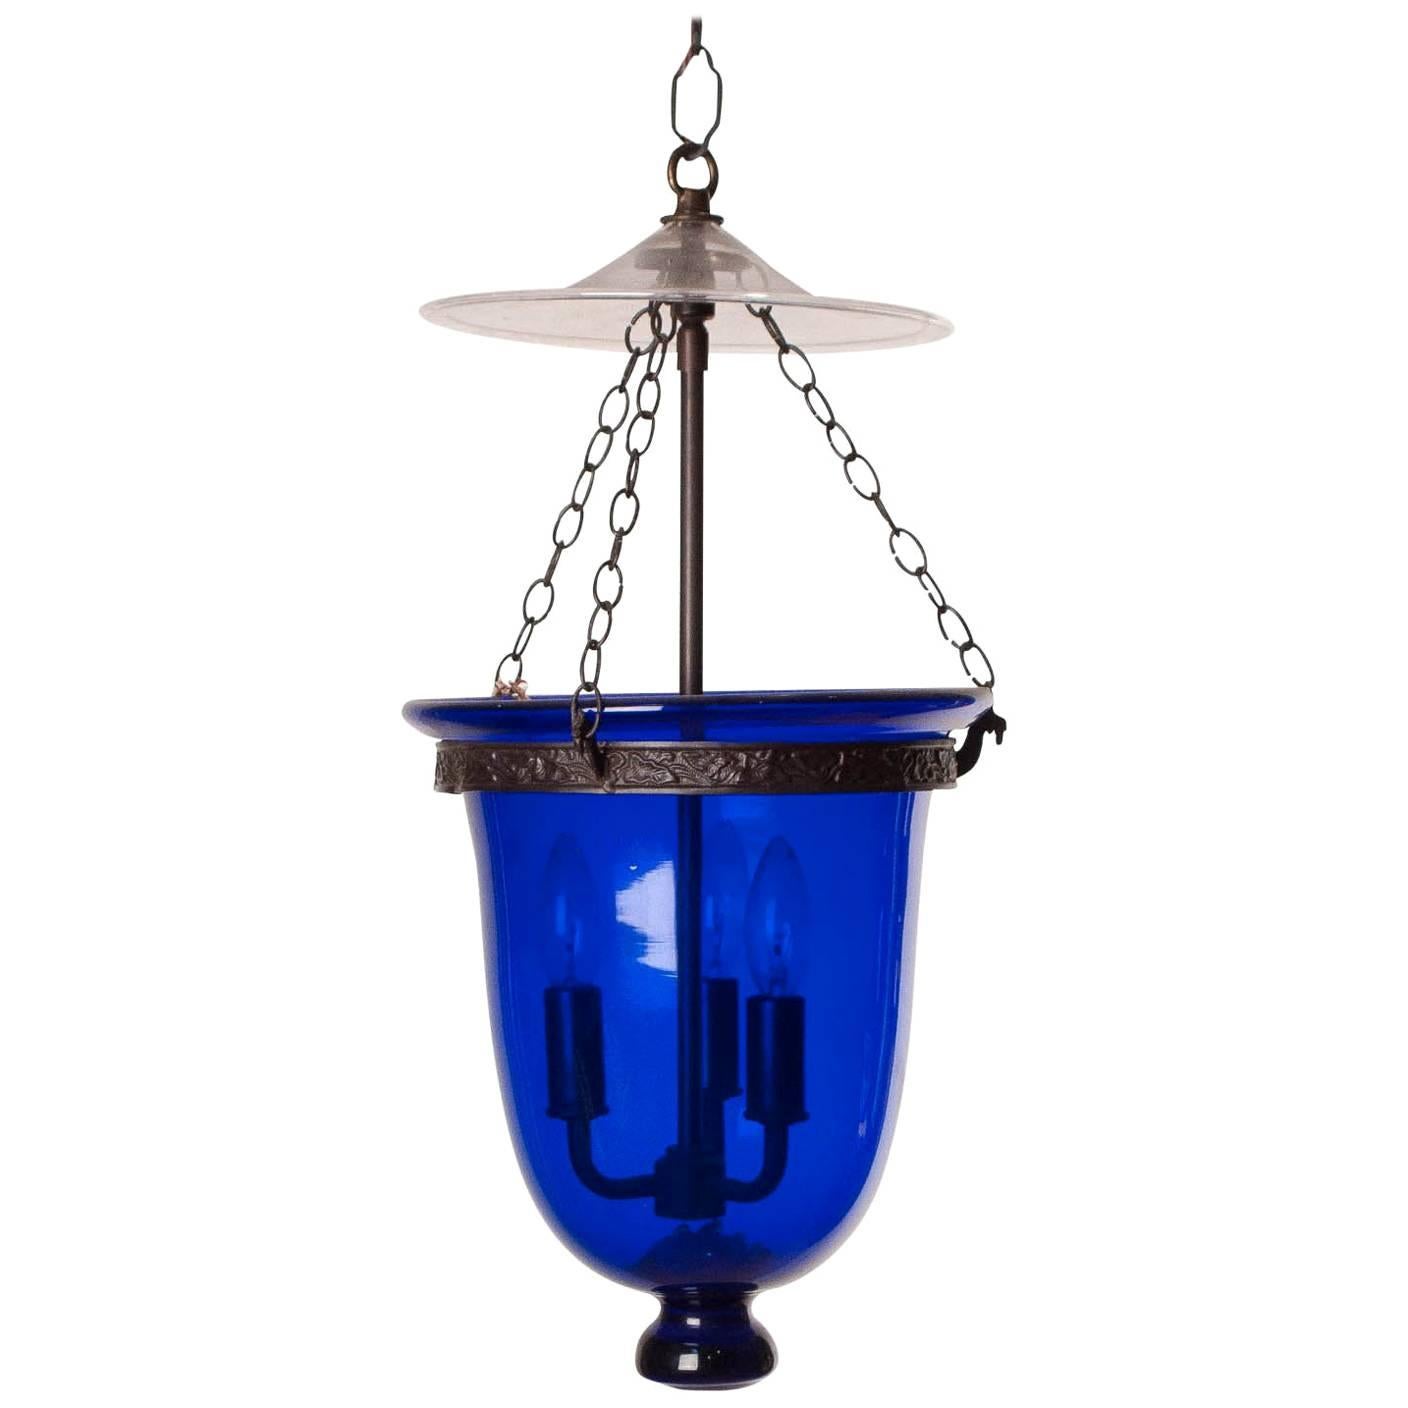 Antique Blue Glass Bell Jar Lantern with Clear Cover, circa 1860